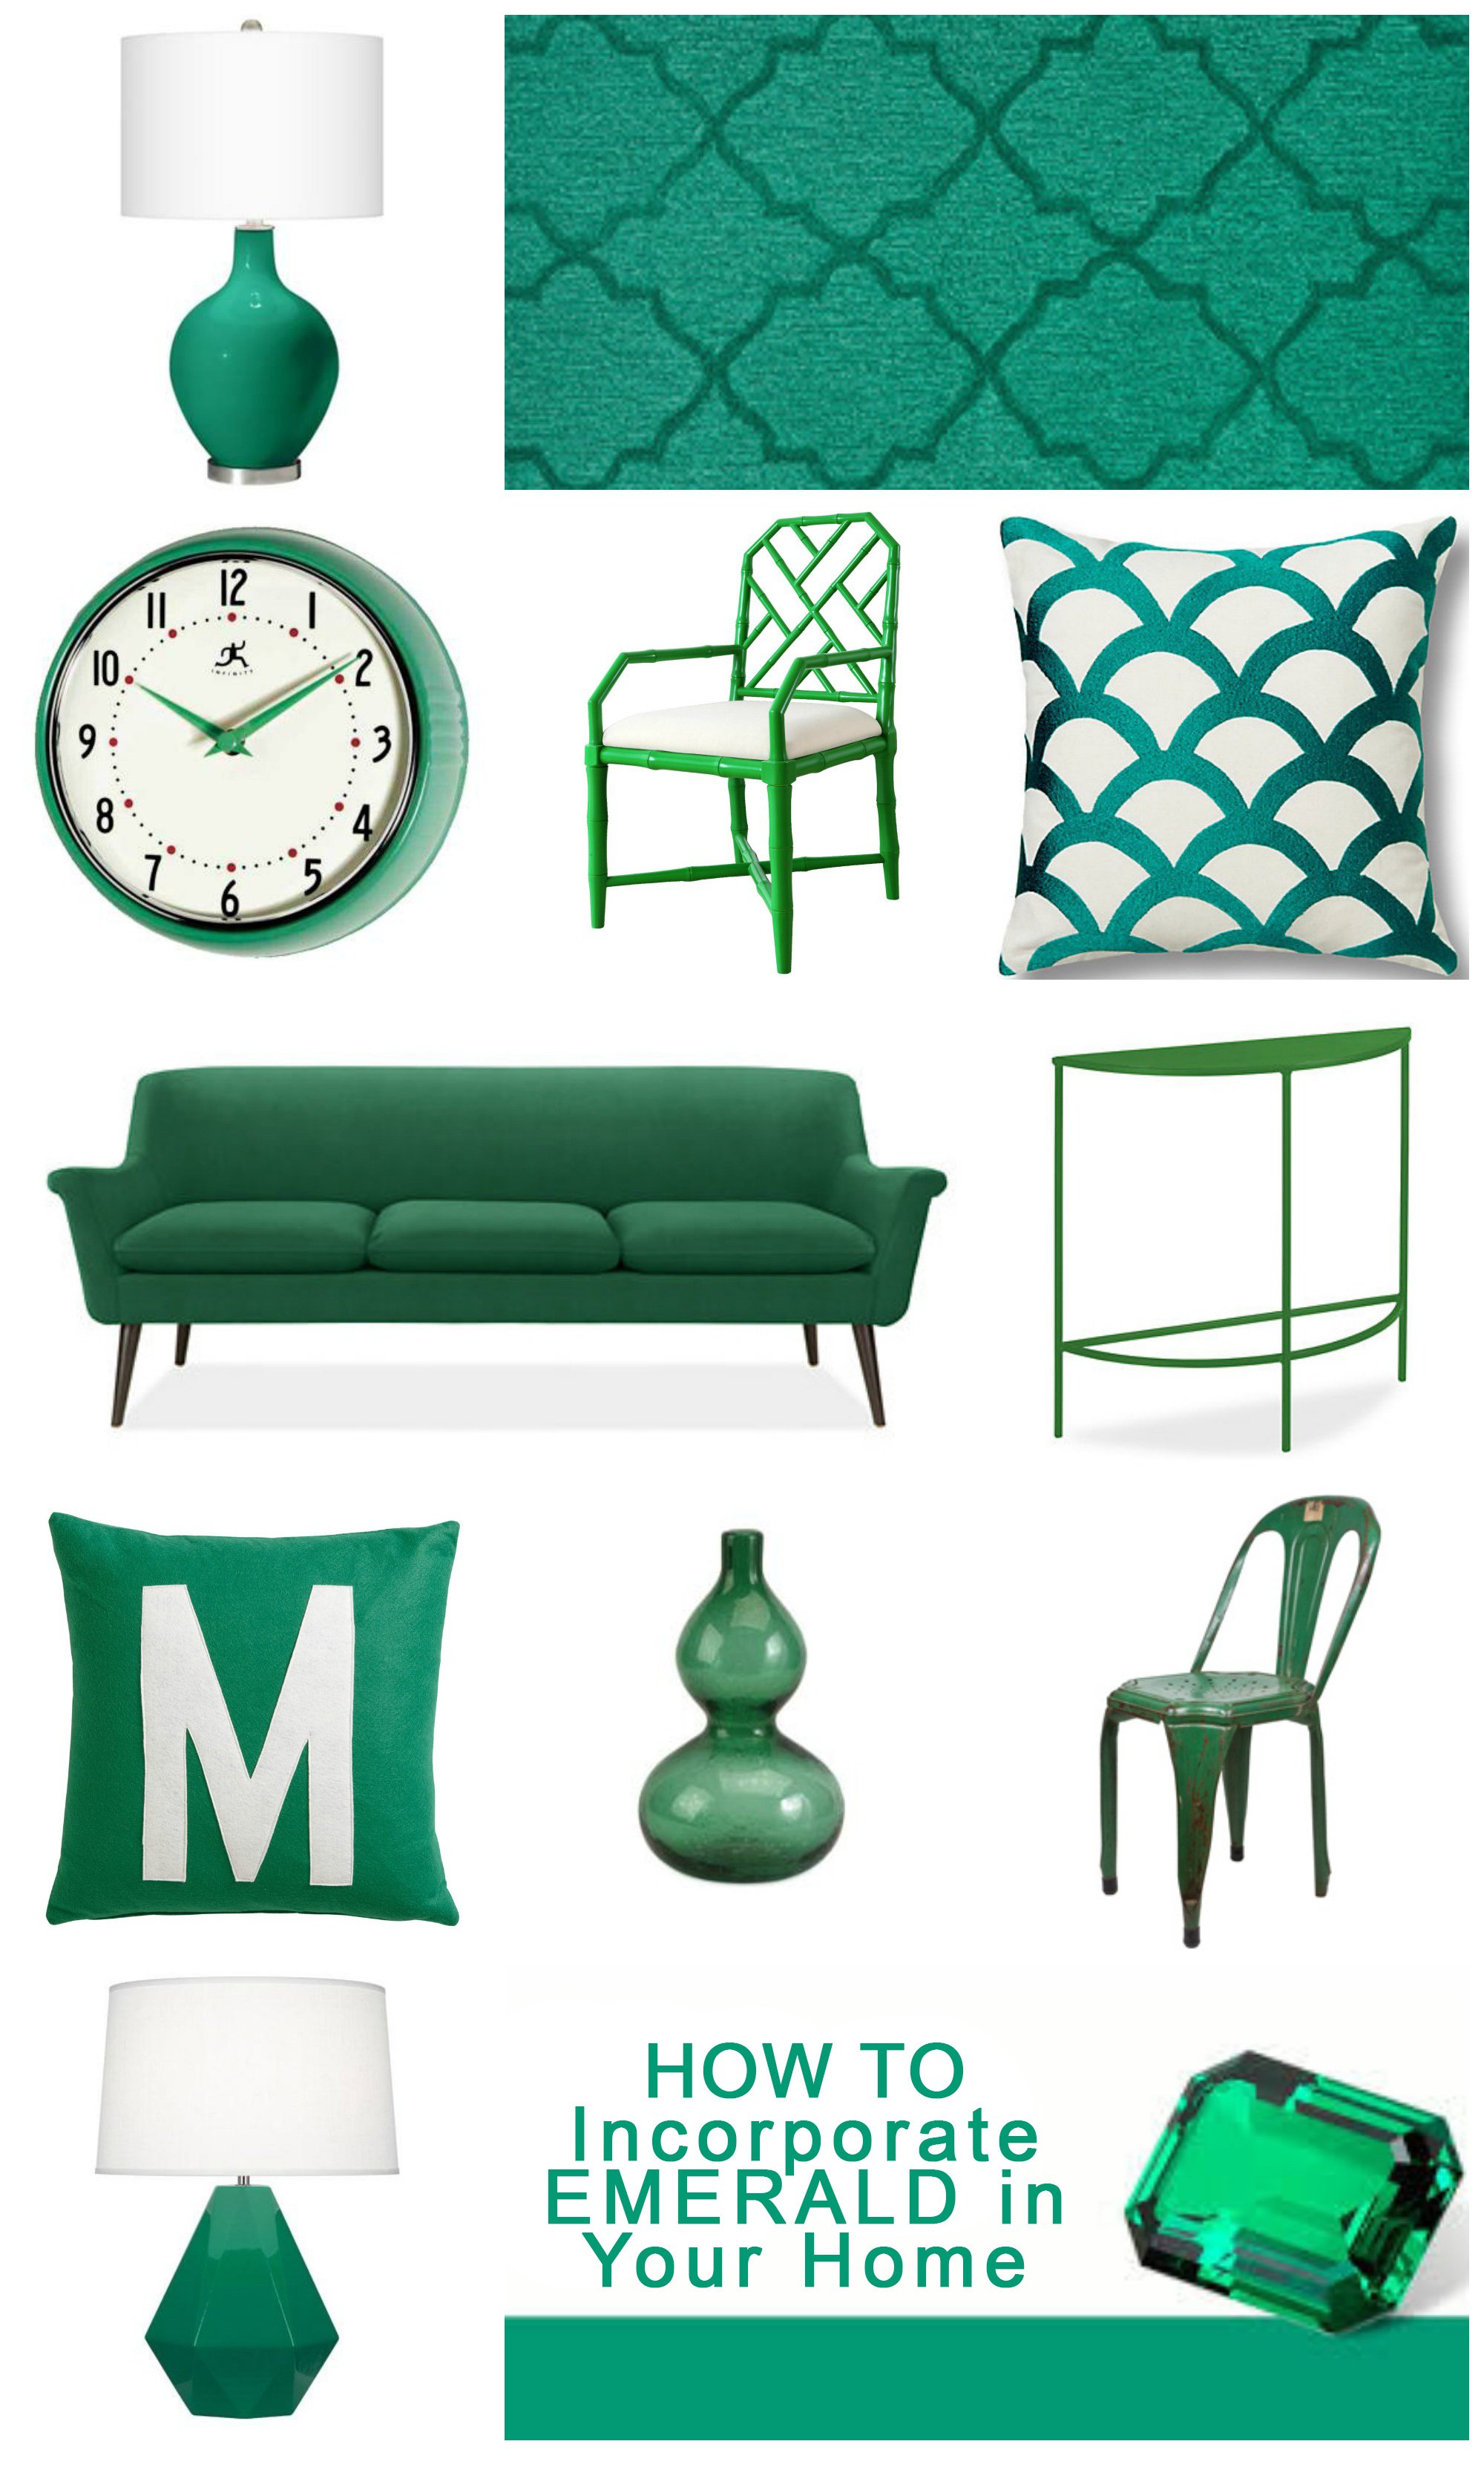 How to Incorporate Emerald in Your Home Decor